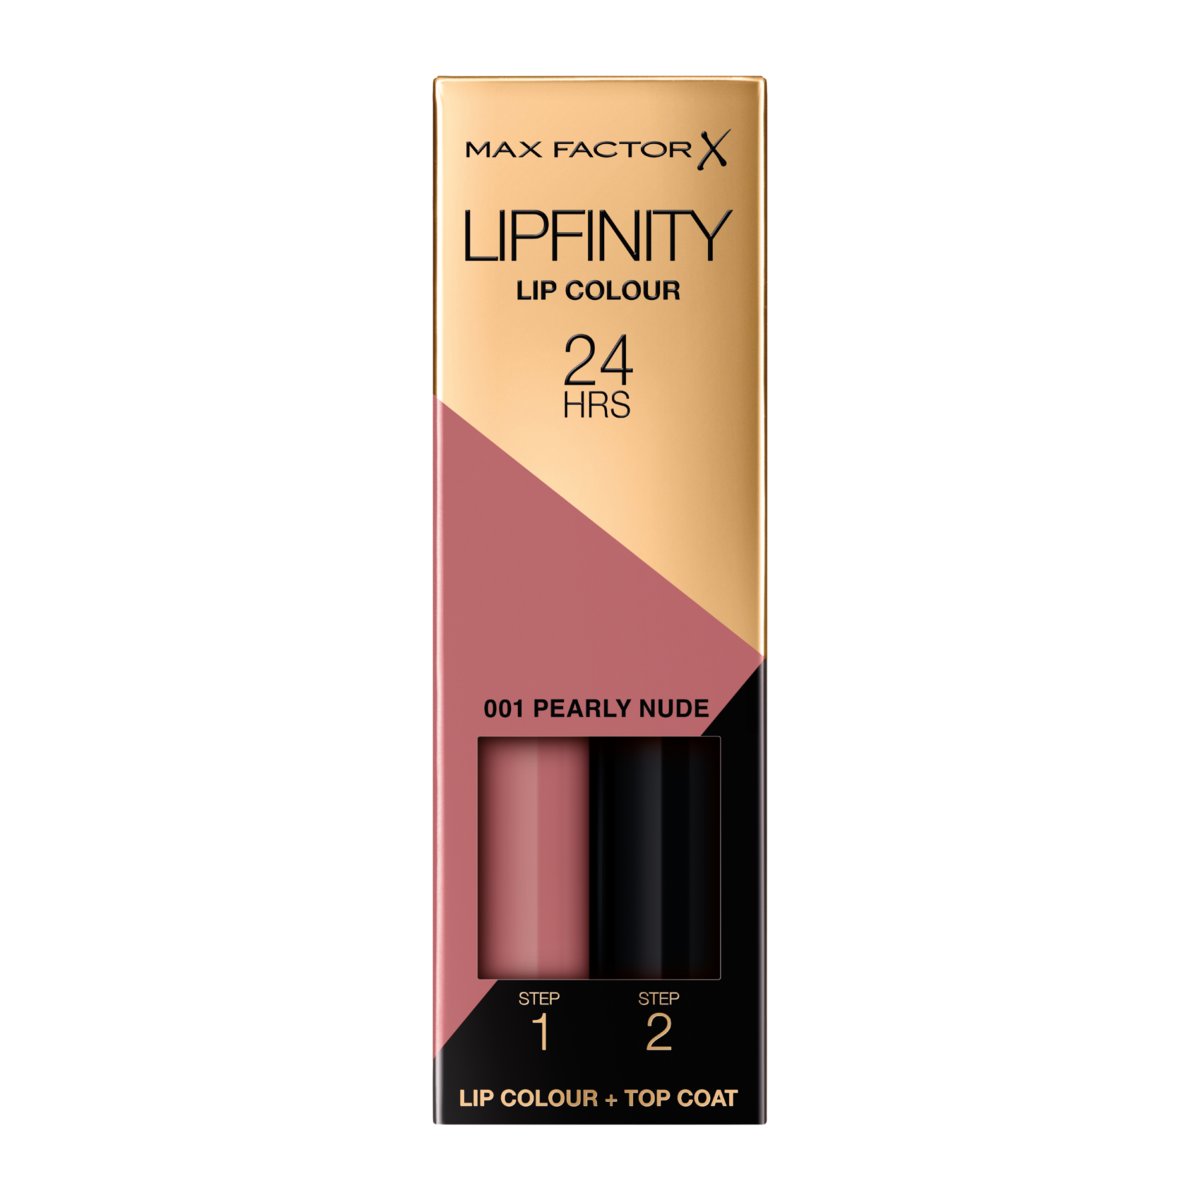 Max Factor Lipfinity 24HRS pomadka 4,2g 001 Pearly Nude